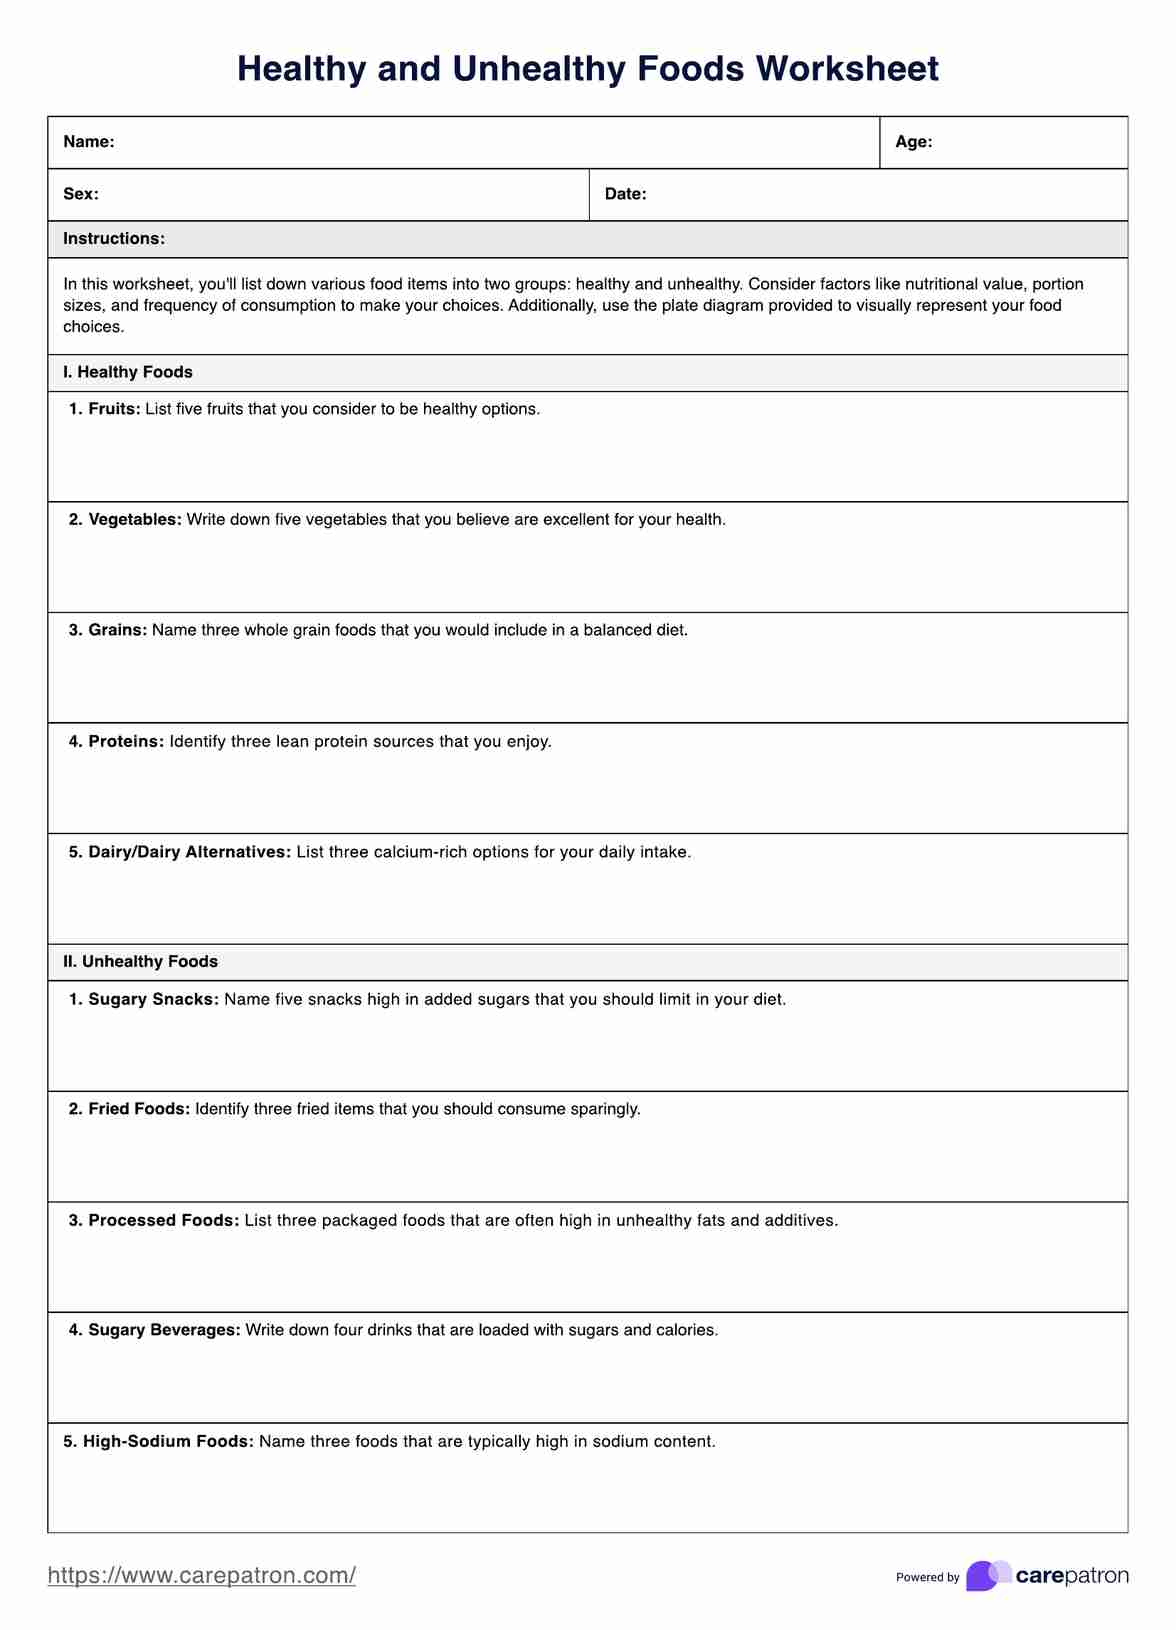 Healthy and Unhealthy Food Worksheet PDF Example